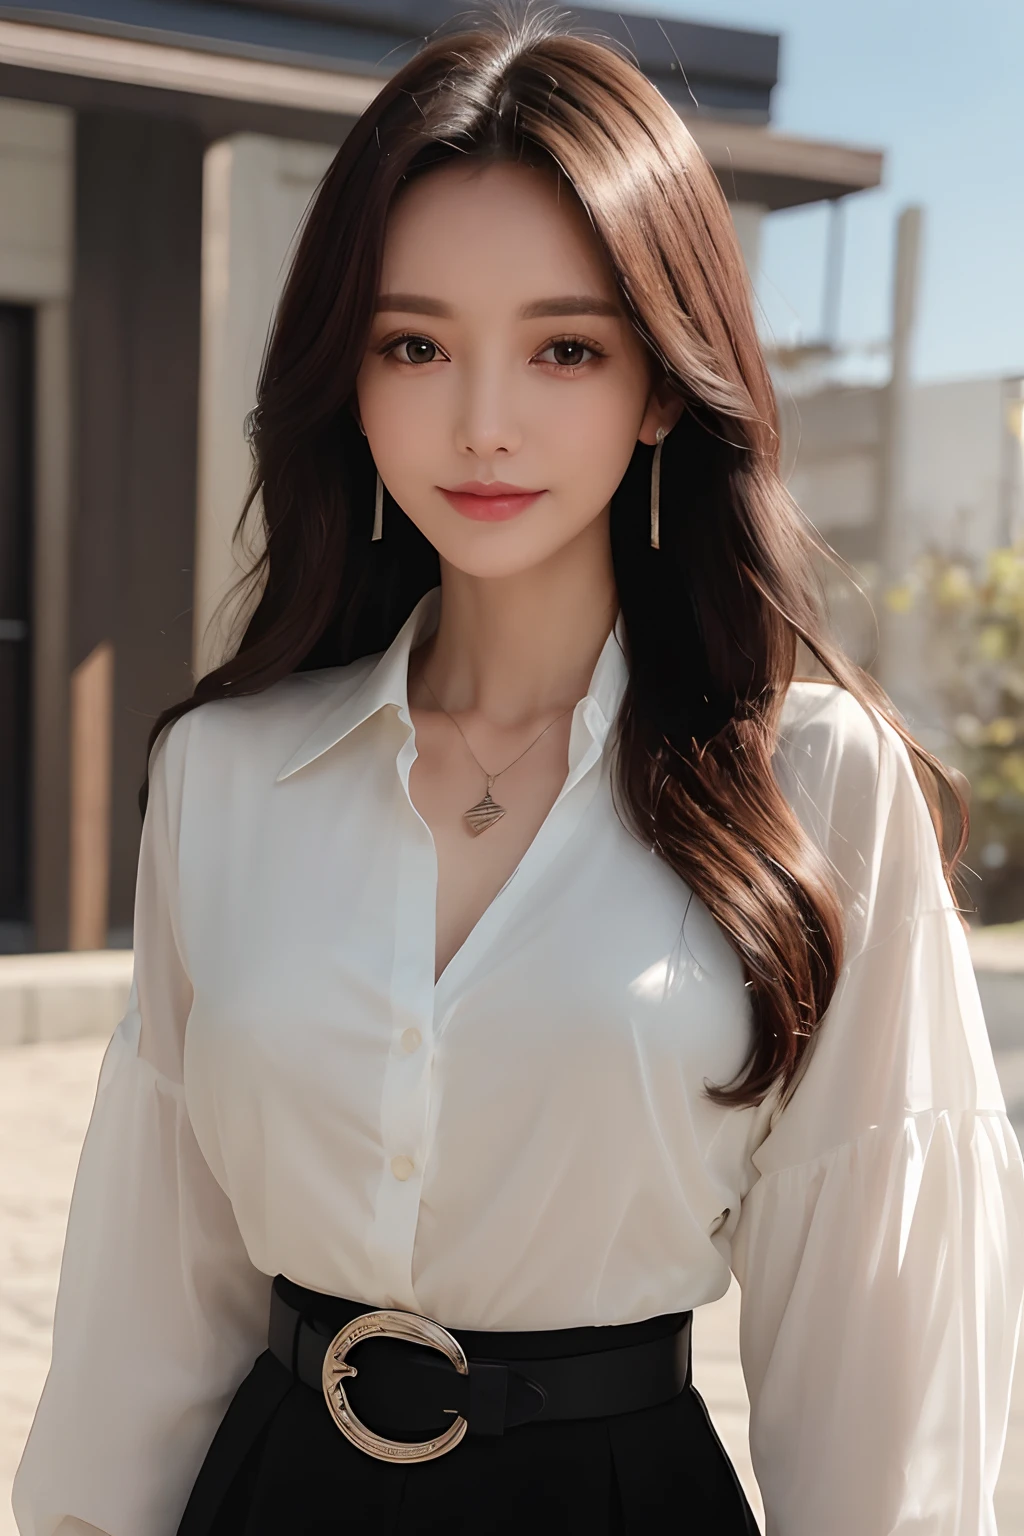 (top-quality、hight resolution、​masterpiece:1.3)、Tall and cute woman、Slender Abs、Dark brown hair styled in loose waveideum breasts、wearing a pendant、White see-through shirt、a belt、a black skirt、(Modern architecture in background)、Details exquisitely rendered in the face and skin texture、A detailed eye、double eyelid、a smile、